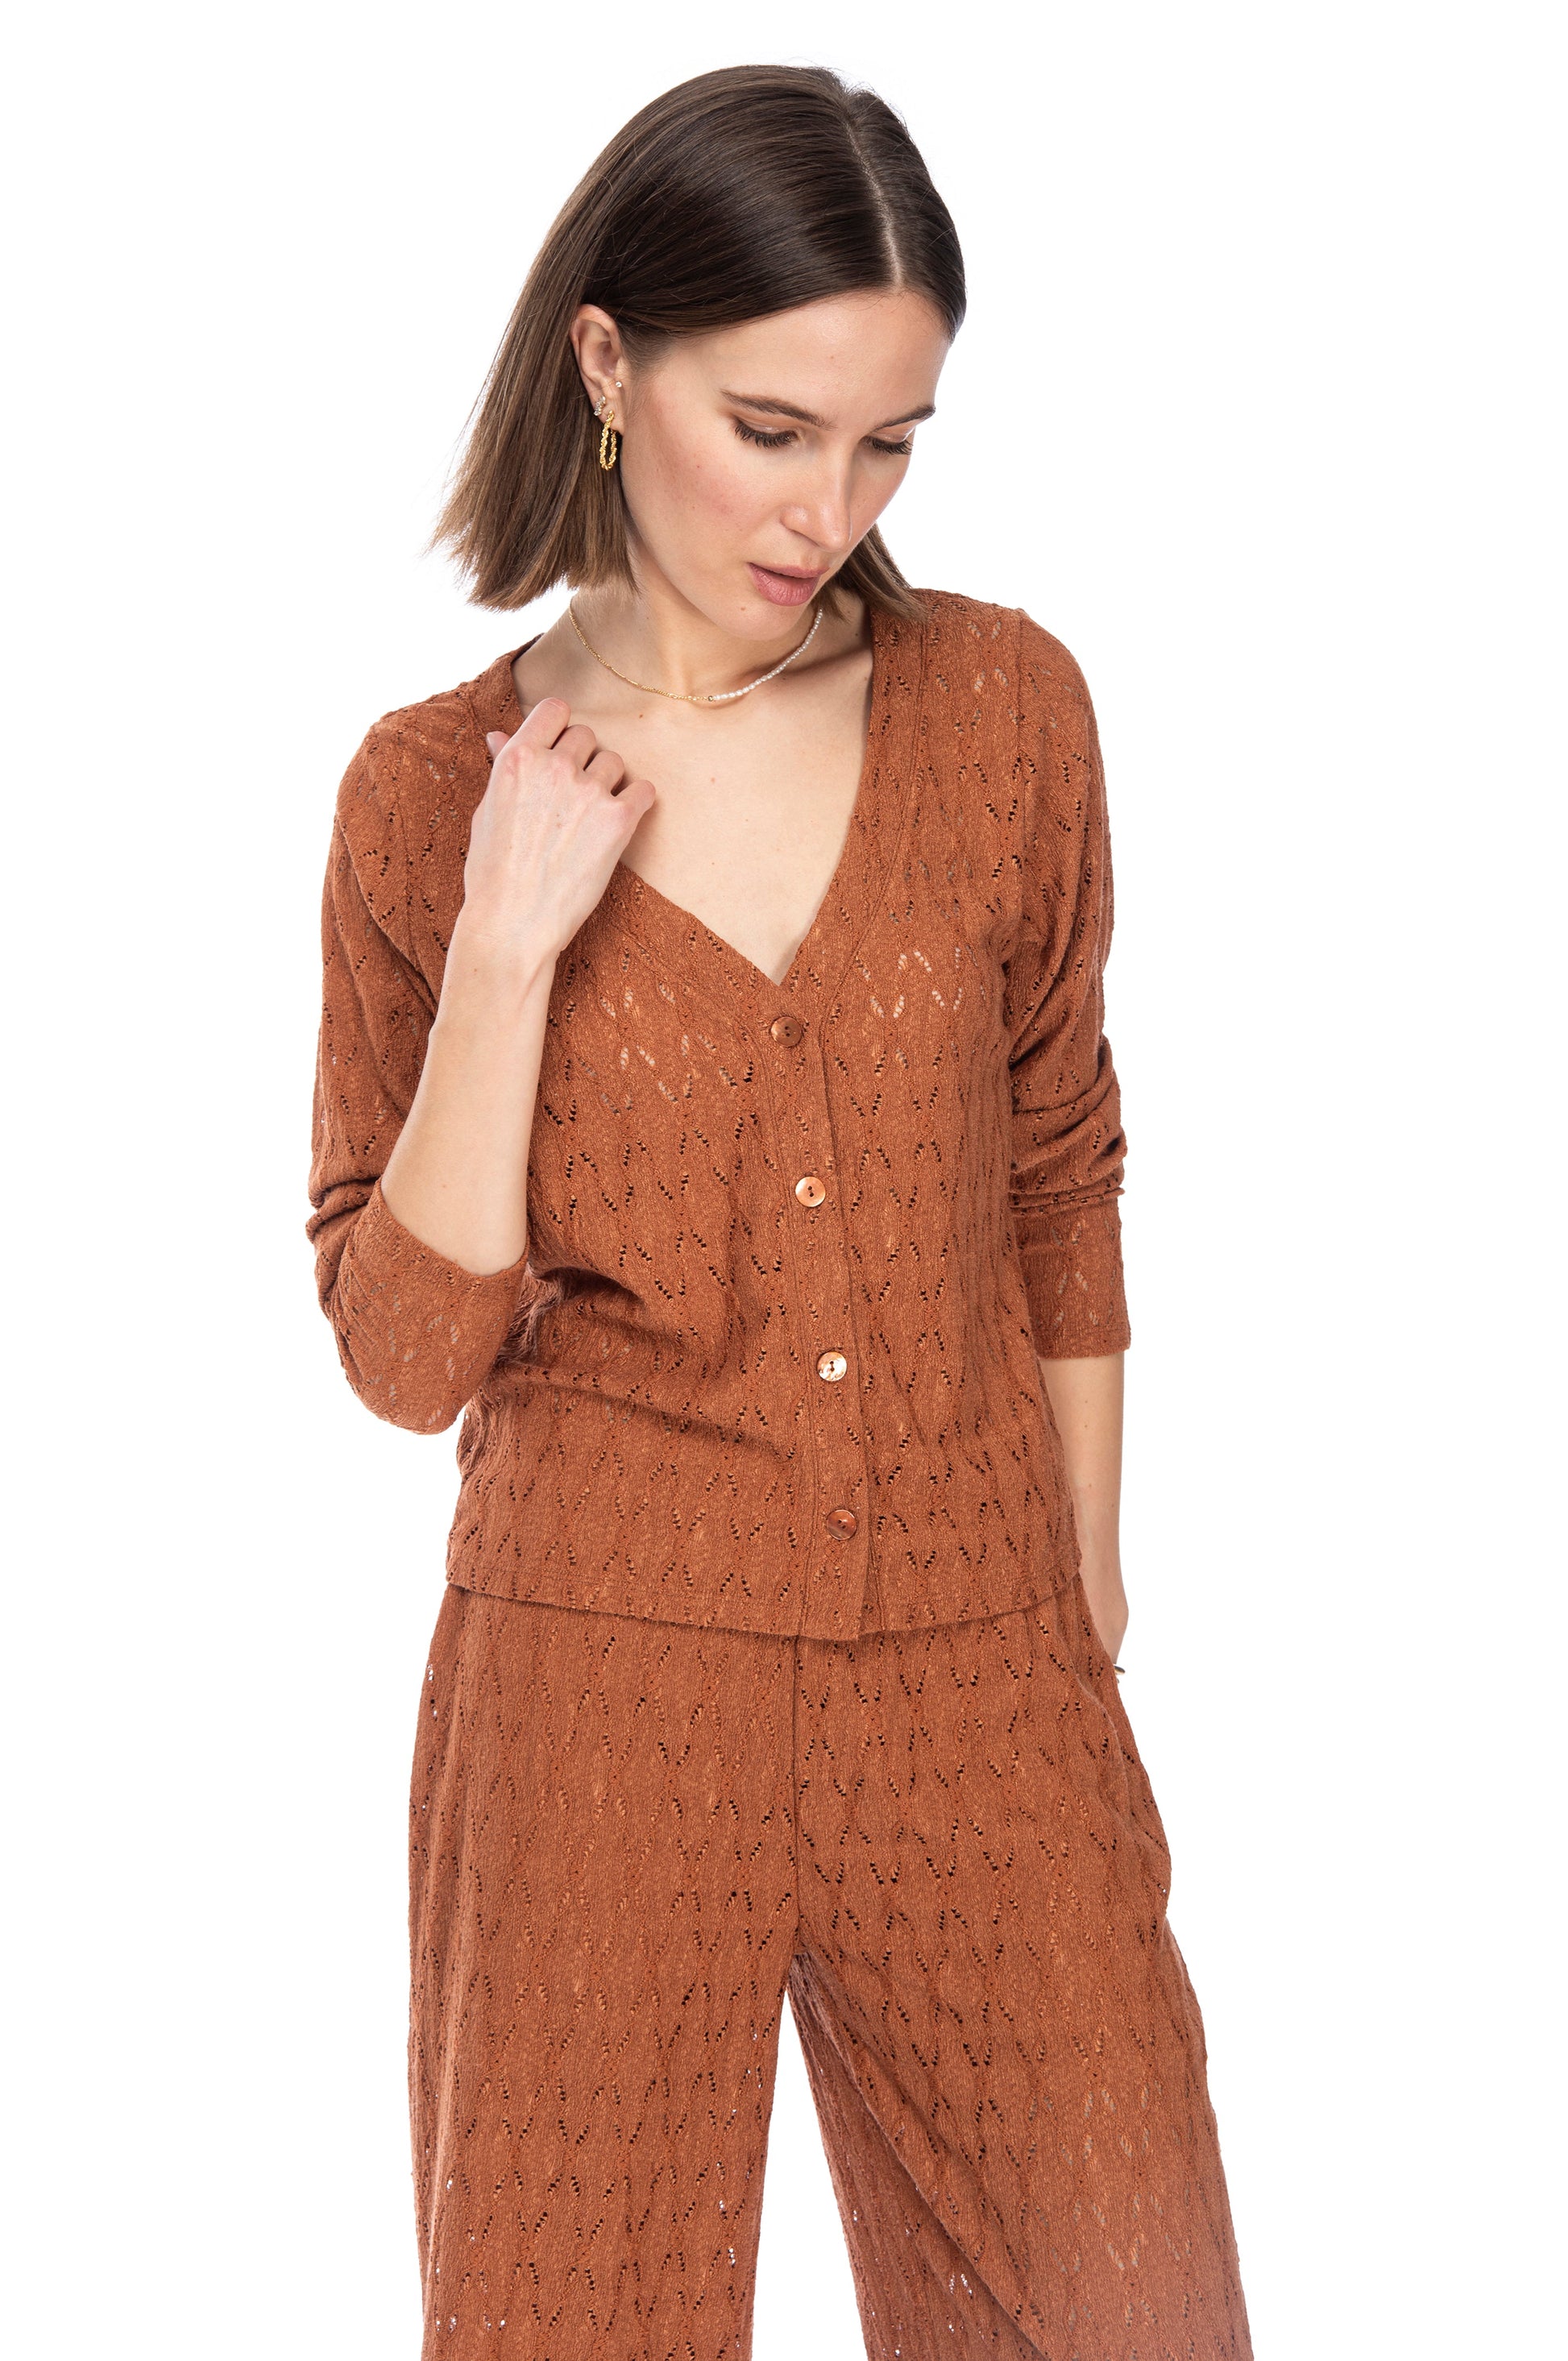 A woman in a stylish, textured terracotta LS Crop Bttn Cardigan and Gilly ankle-length pants looking down and to the side, lightly adjusting her collar.